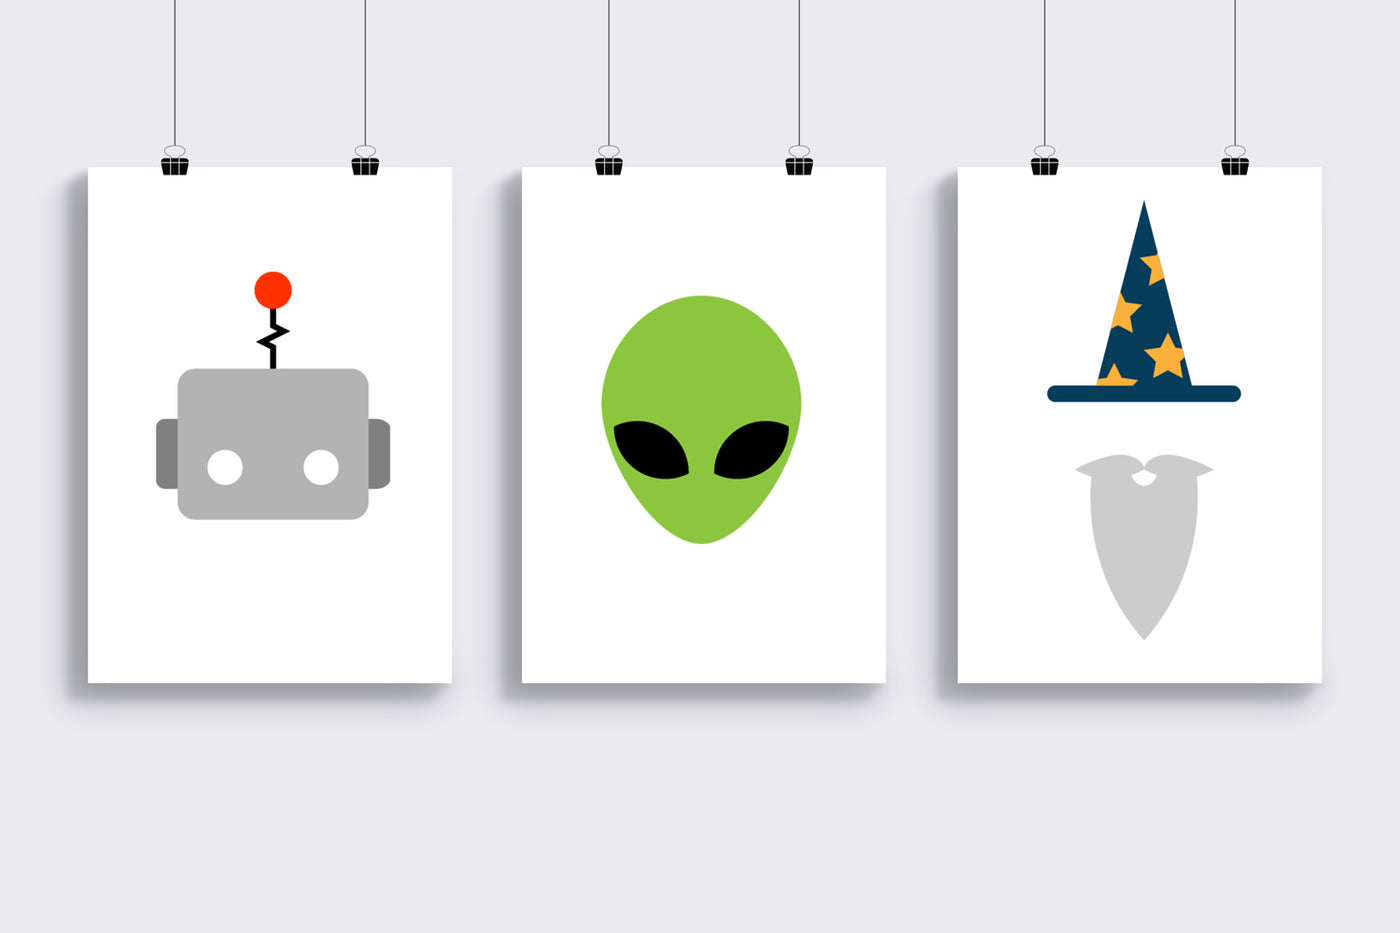 Trio of SVG icons - a robot face, an alien face, and a wizard beard with hat.